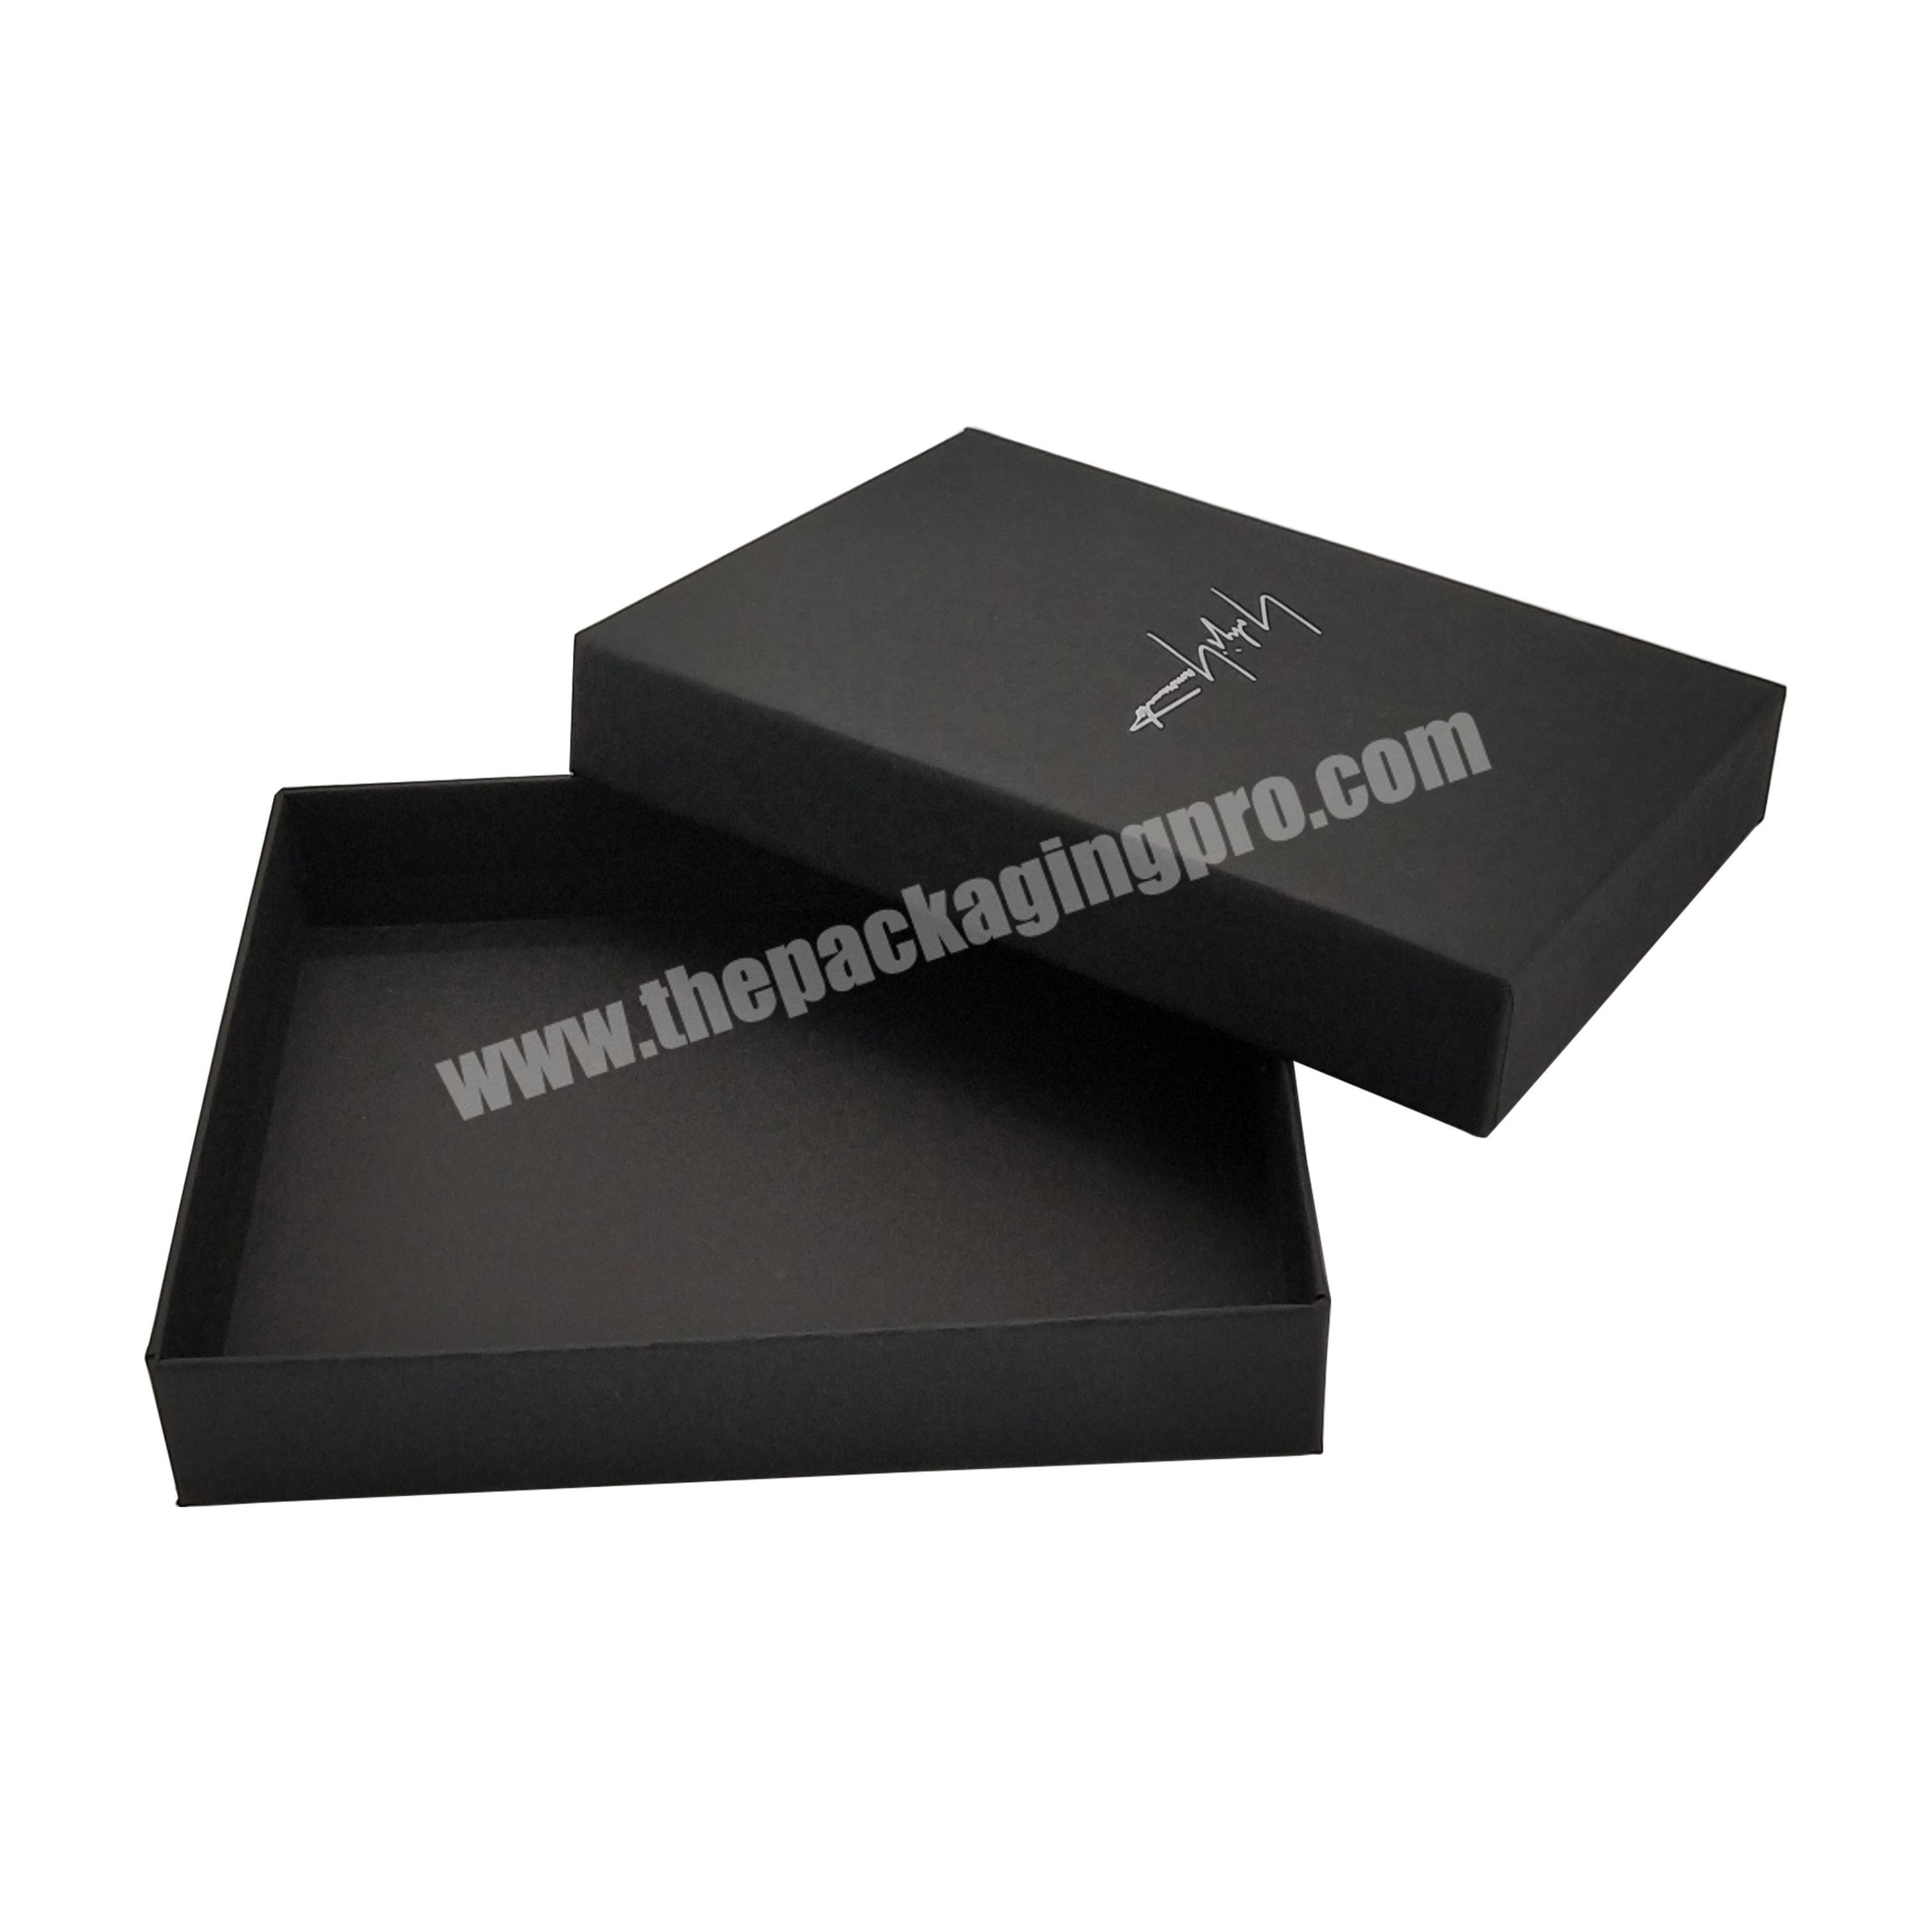 High quality bow neck tie clothes gift box black square packaging paper box business card storage packaging boxes with logo